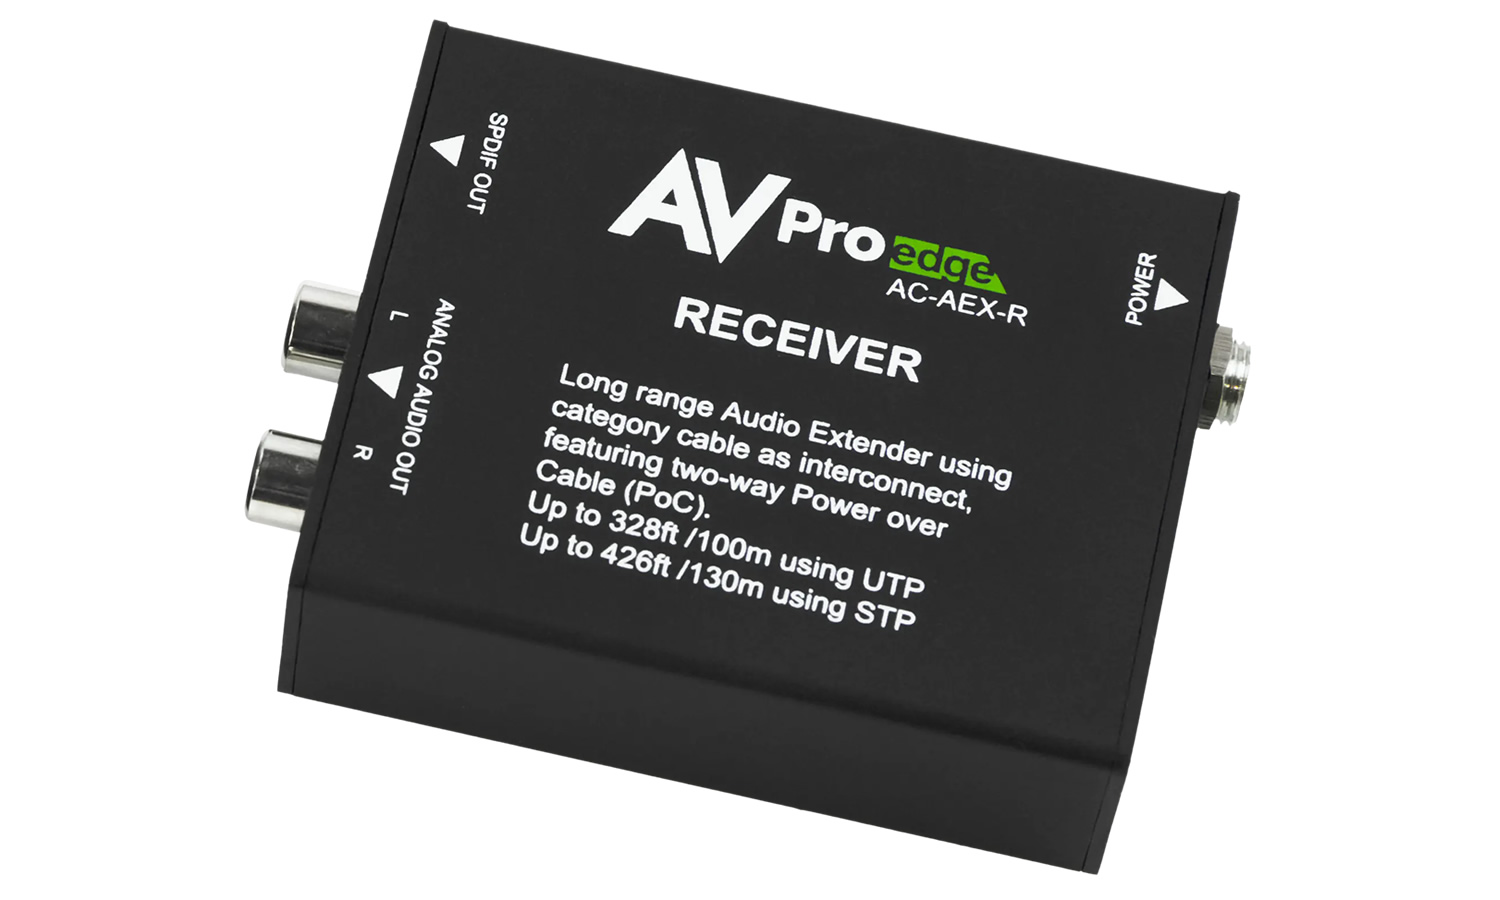 AC-AEX-R 100M Uncompressed Audio Receiver by AVPro Edge